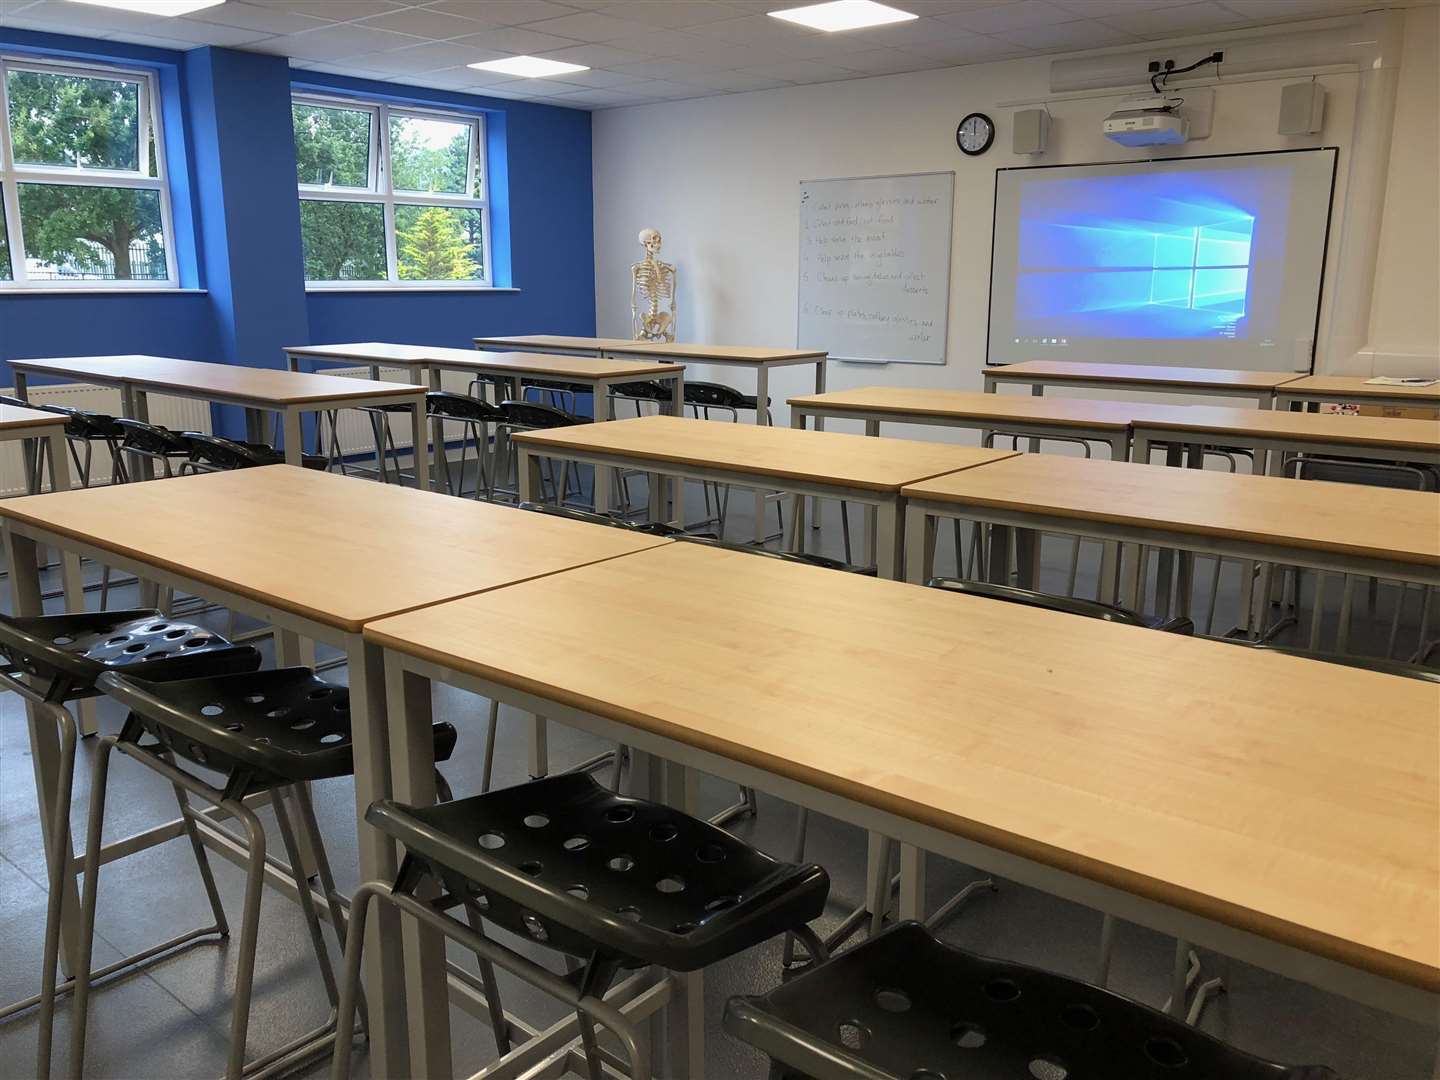 One of the new science classrooms